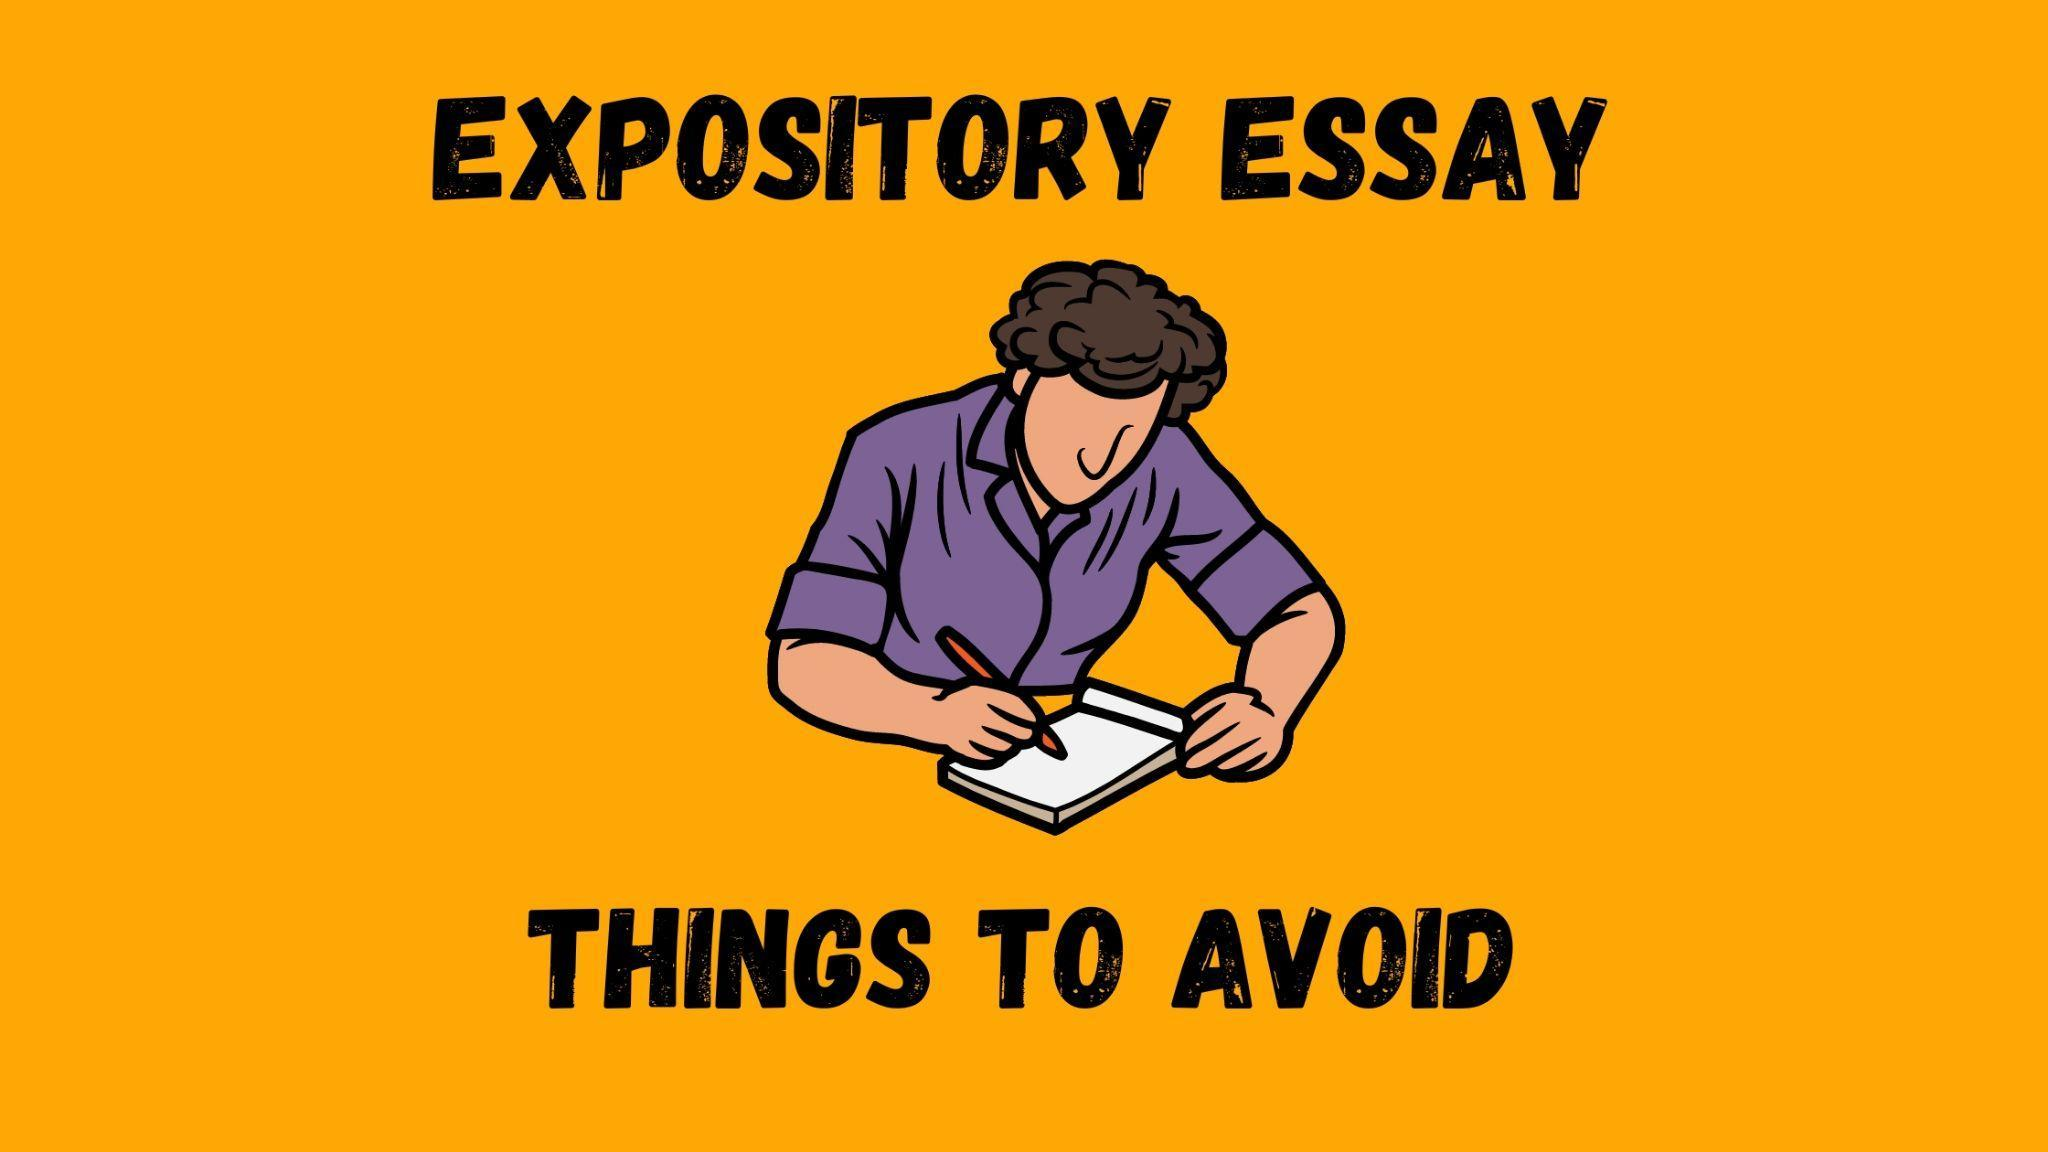 Things to avoid while writing an Expository essay